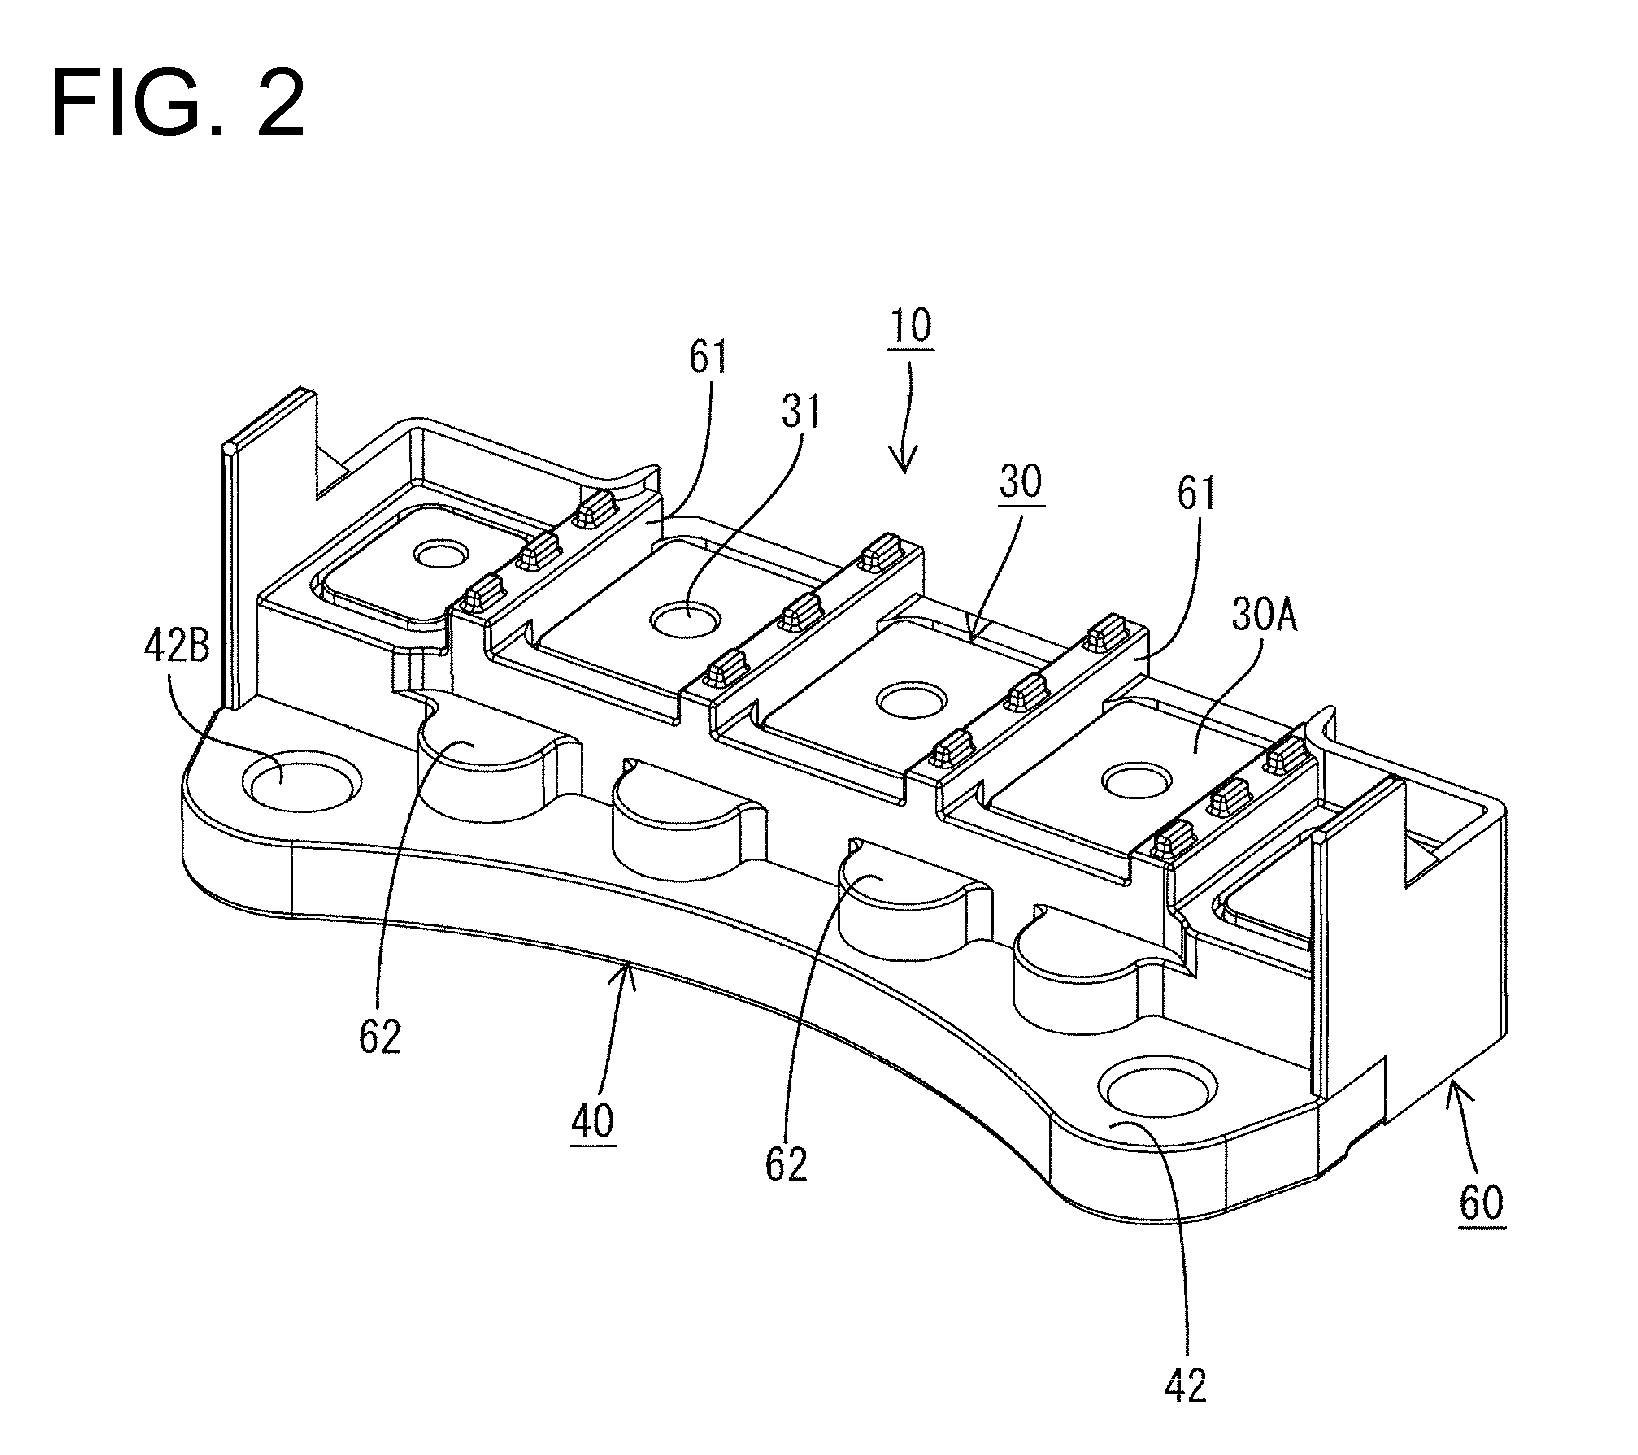 Terminal block with integral heat sink and motor provided therewith